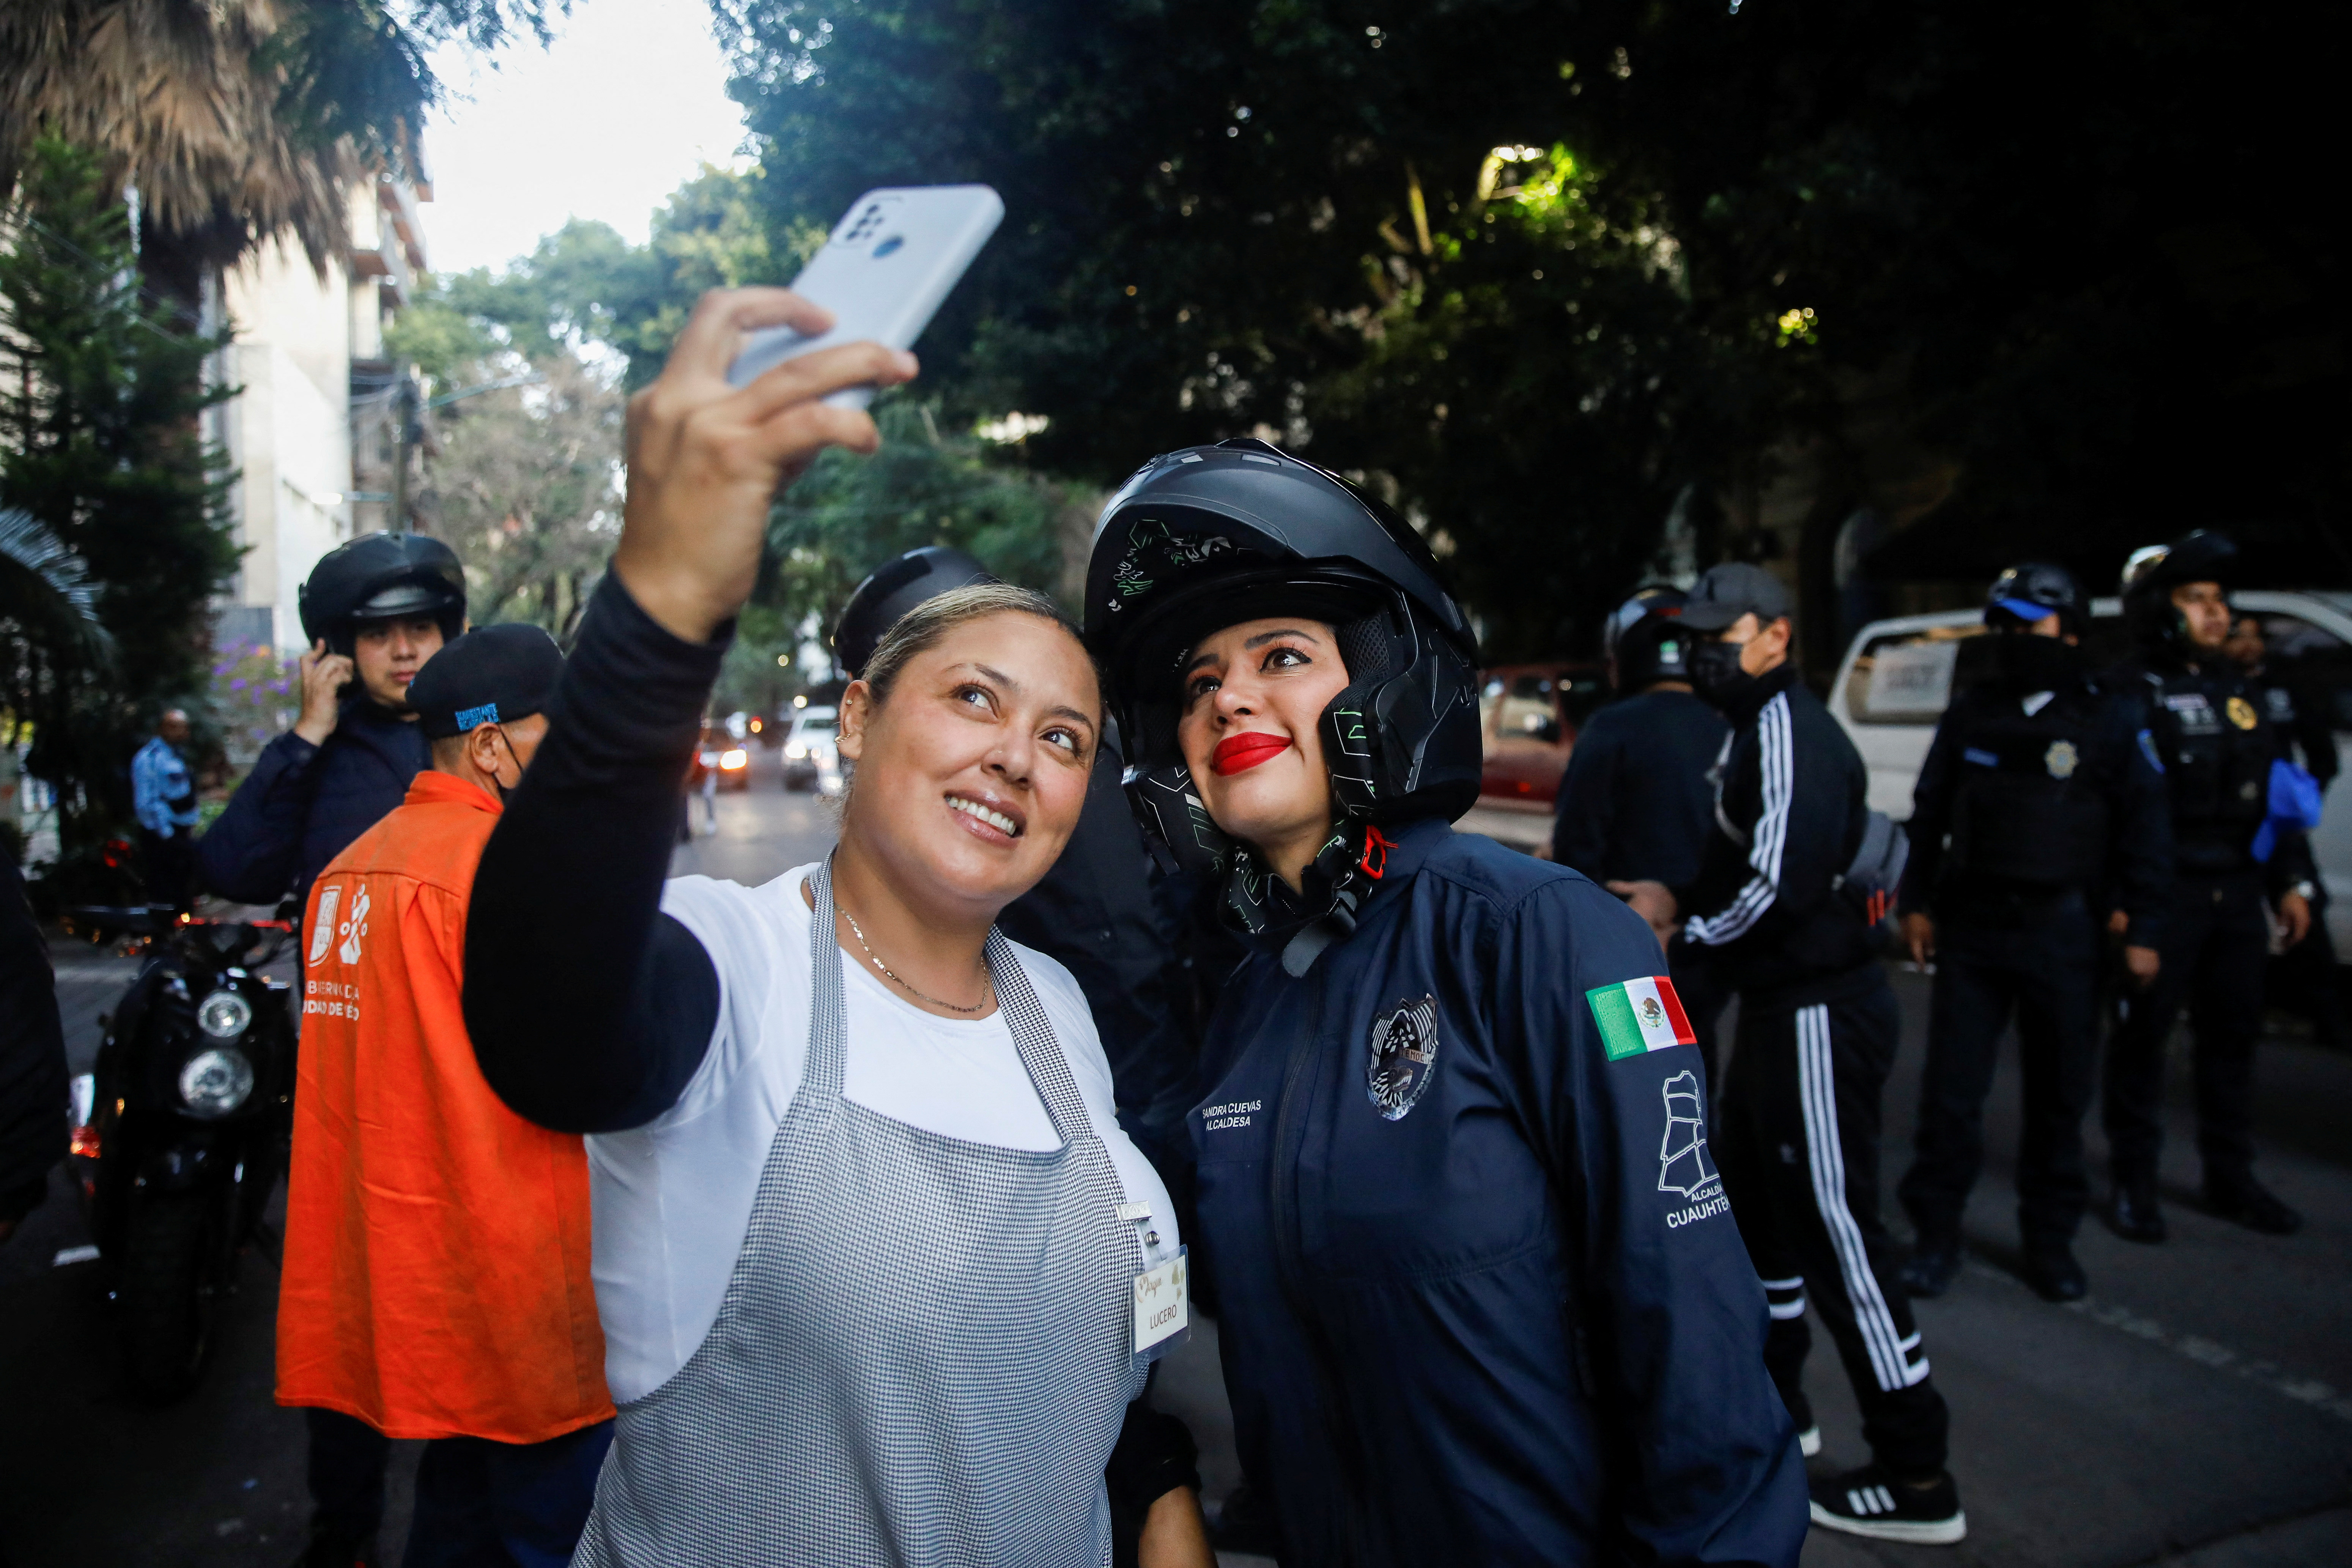 Women aspiring to run for the post of mayor, in Mexico City